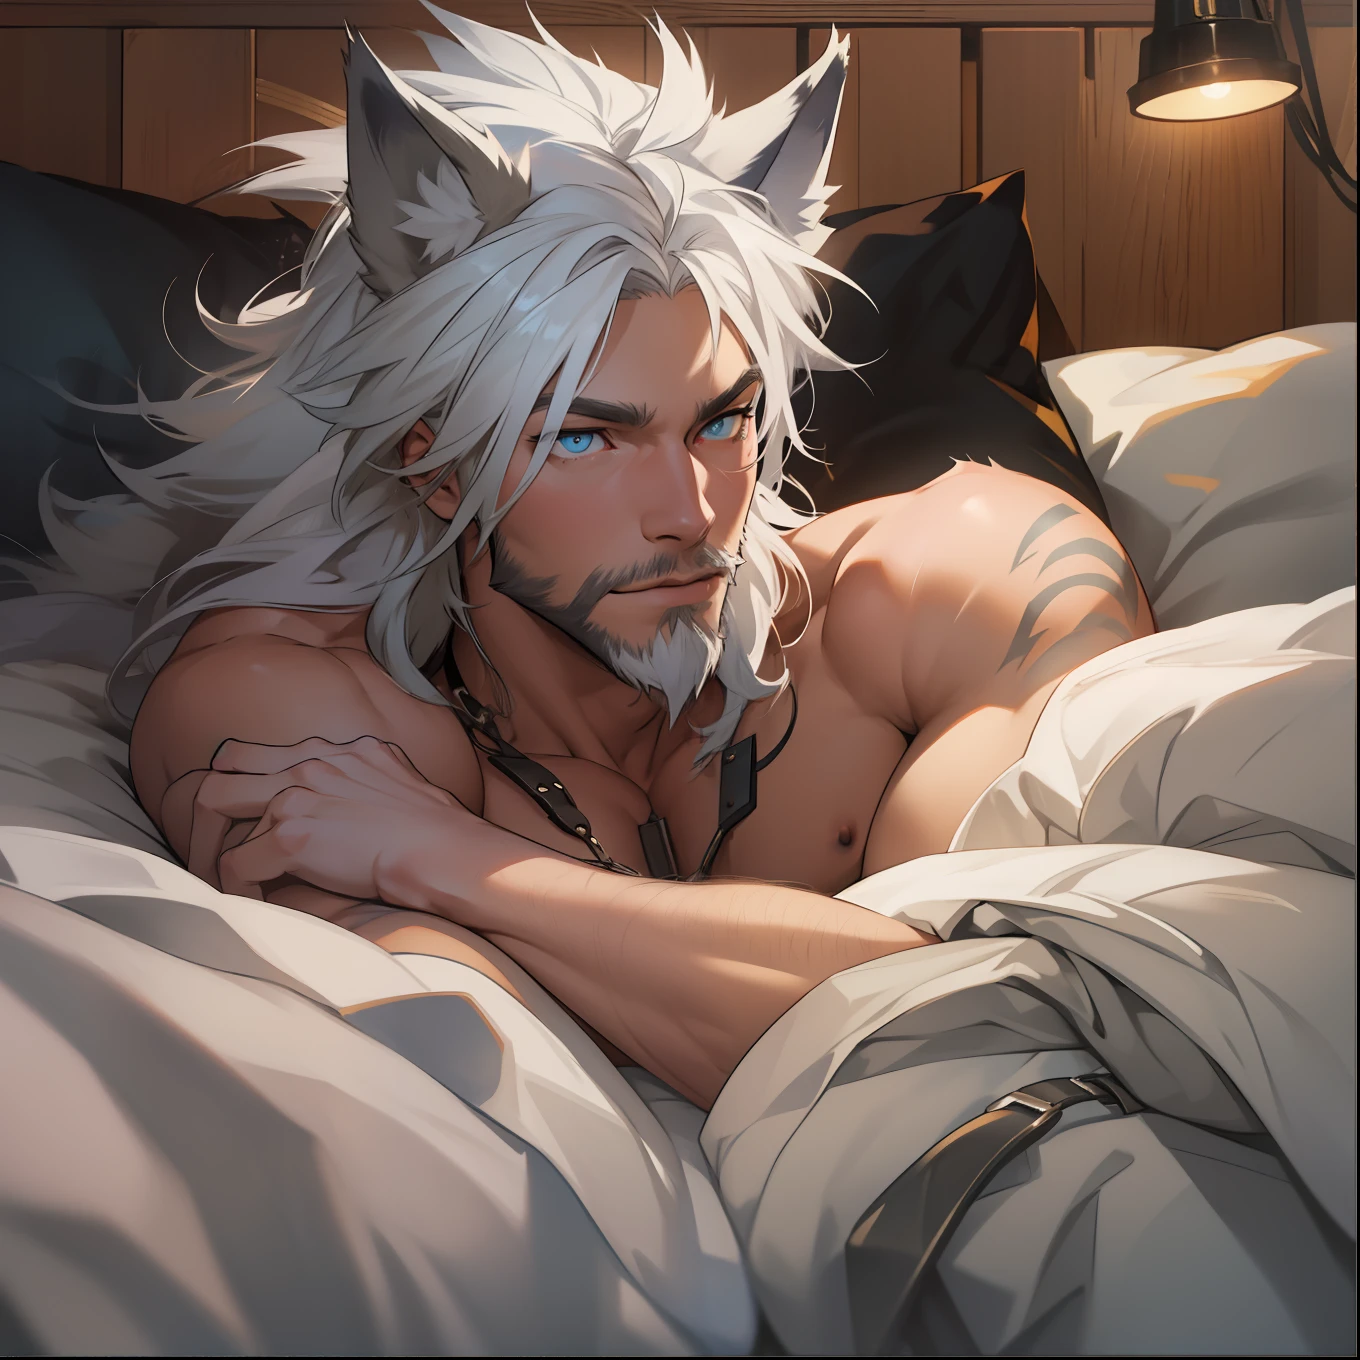 athletic Male with light beard, has flowing white hair, has wolf ears, has wolf tail, shirtless, playful, solo, alone, has bright blue eyes, , relaxing on a bed, wearing leather collar, is alone, by himself, no dog